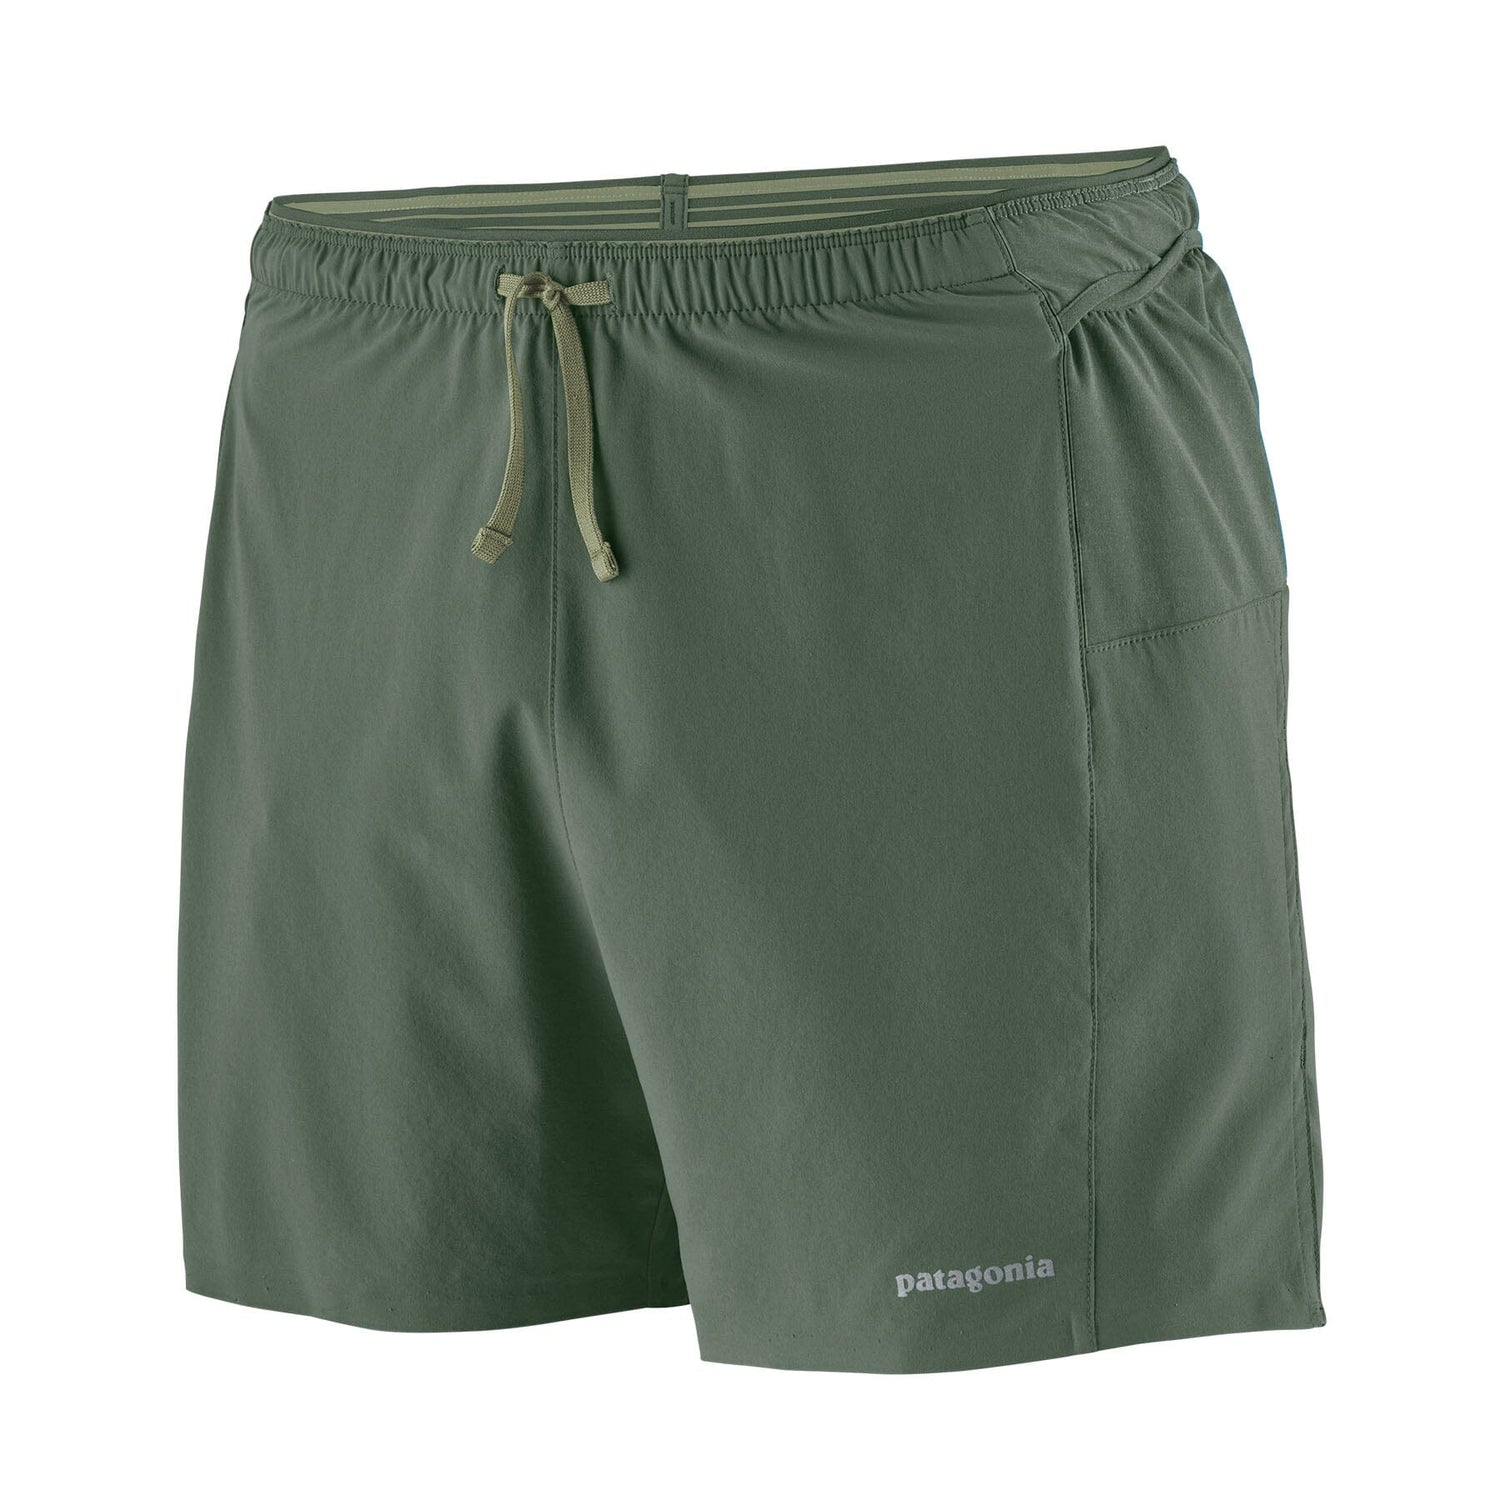 Patagonia M's Strider Pro Shorts 5'' - Recycled Polyester Hemlock Green Pants